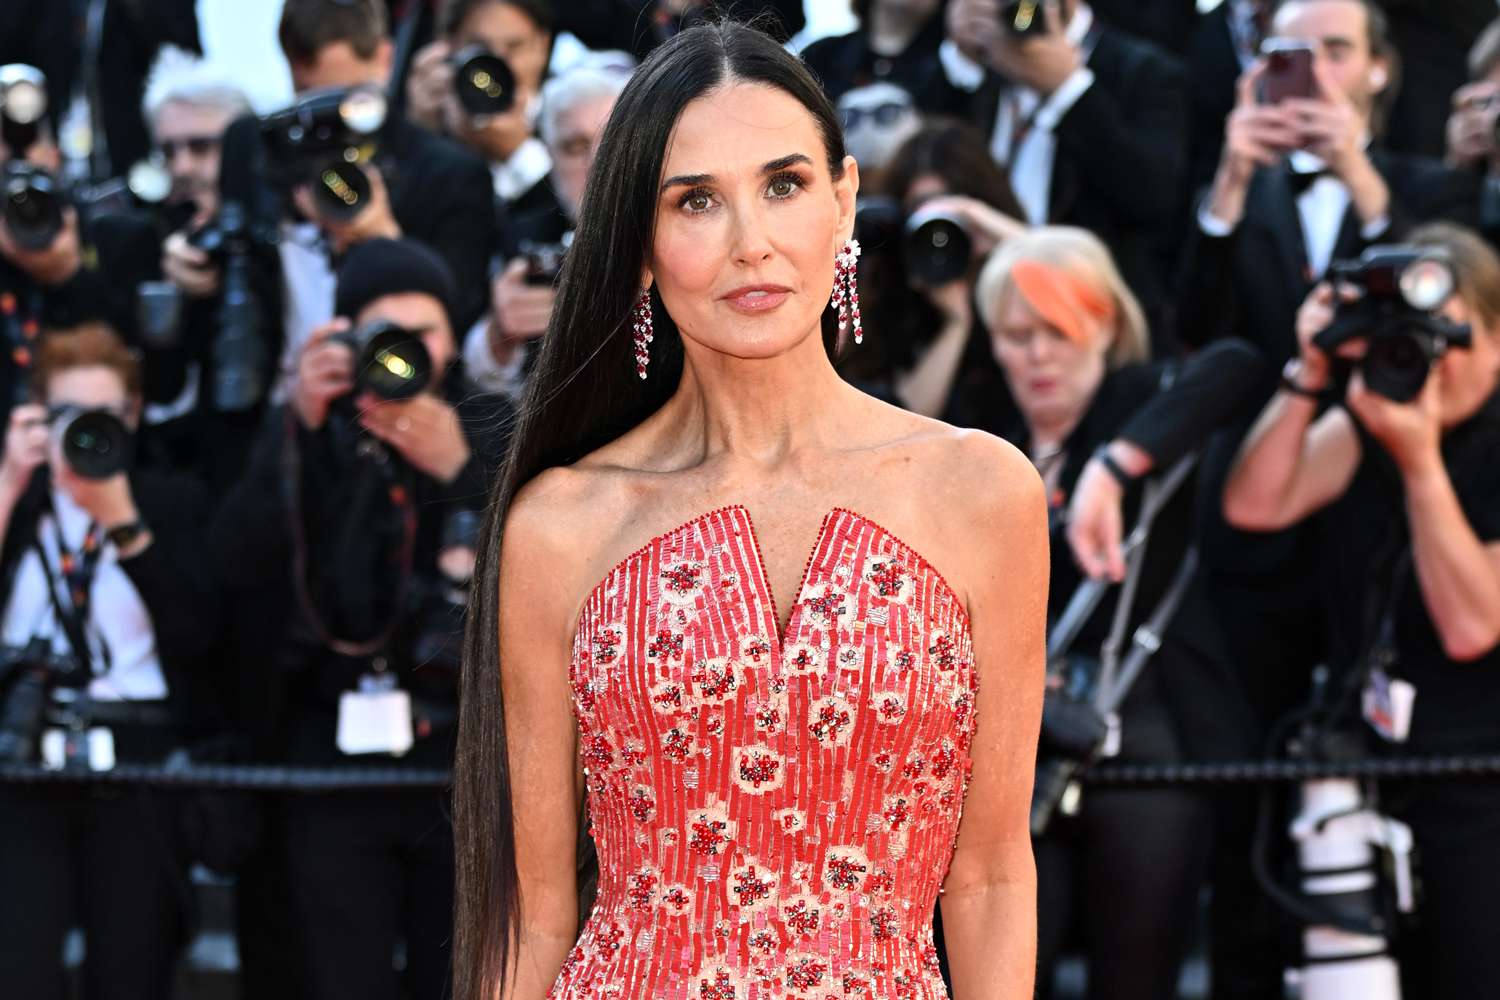 Demi Moore Makes Her Mark on the Cannes Red Carpet in Red-Hot Gown and Waist-Length Hair